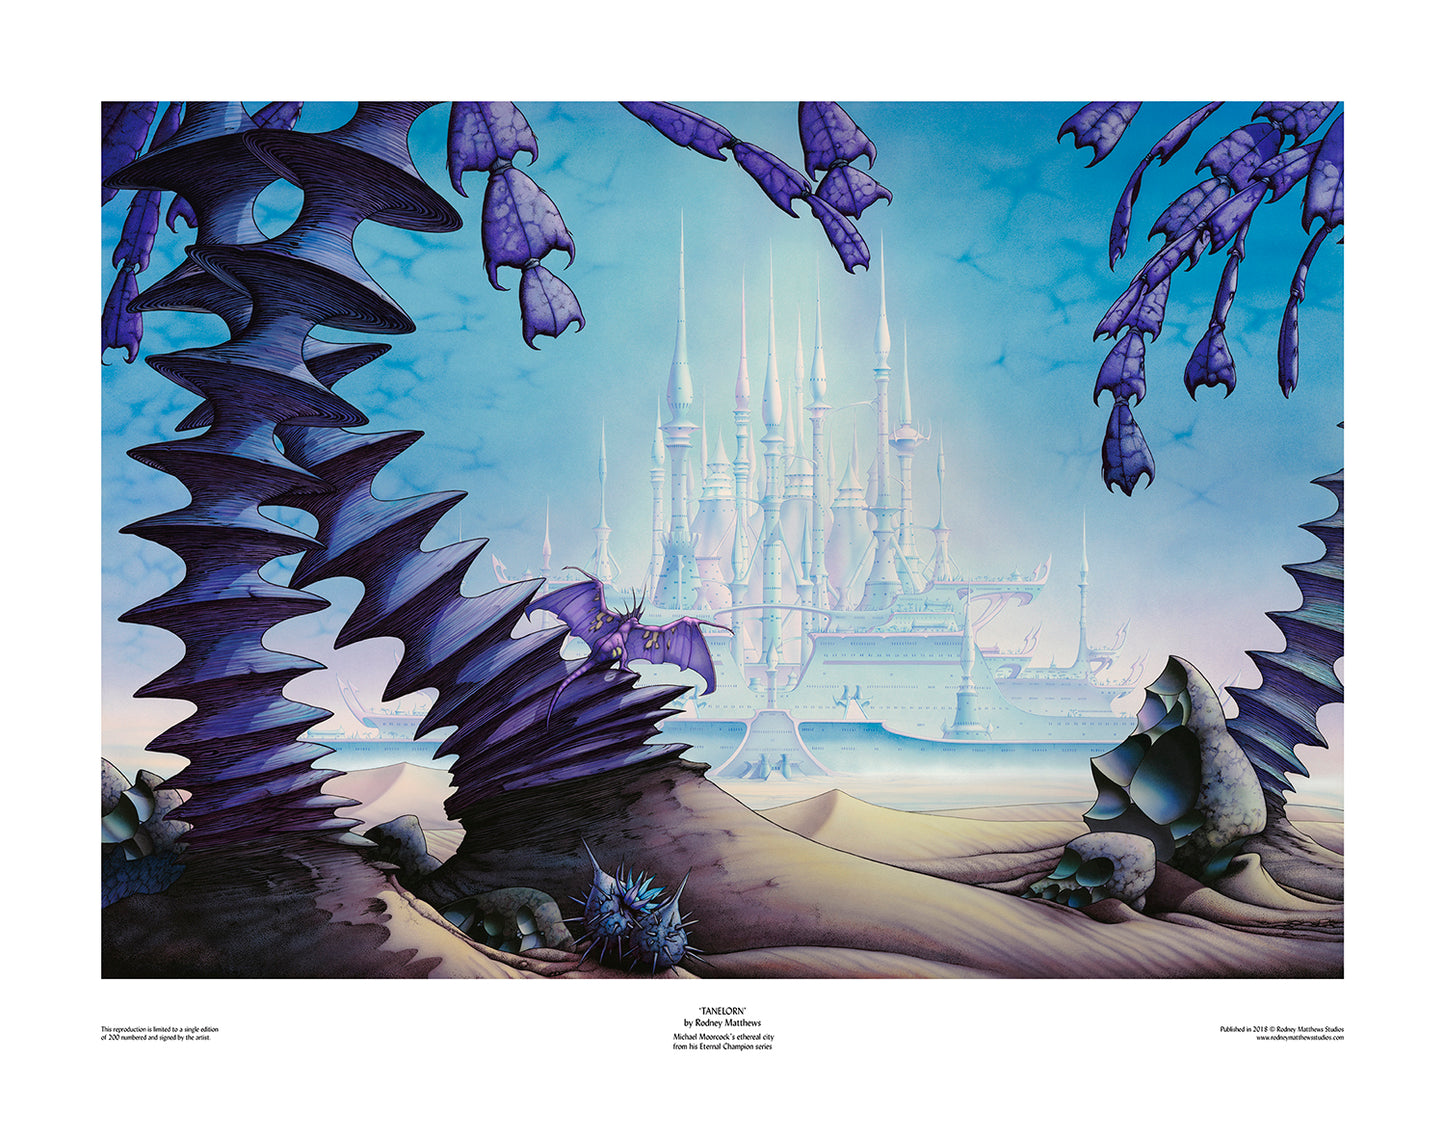 Quest for Tanelorn: Tanelorn limited edition giclèe art print